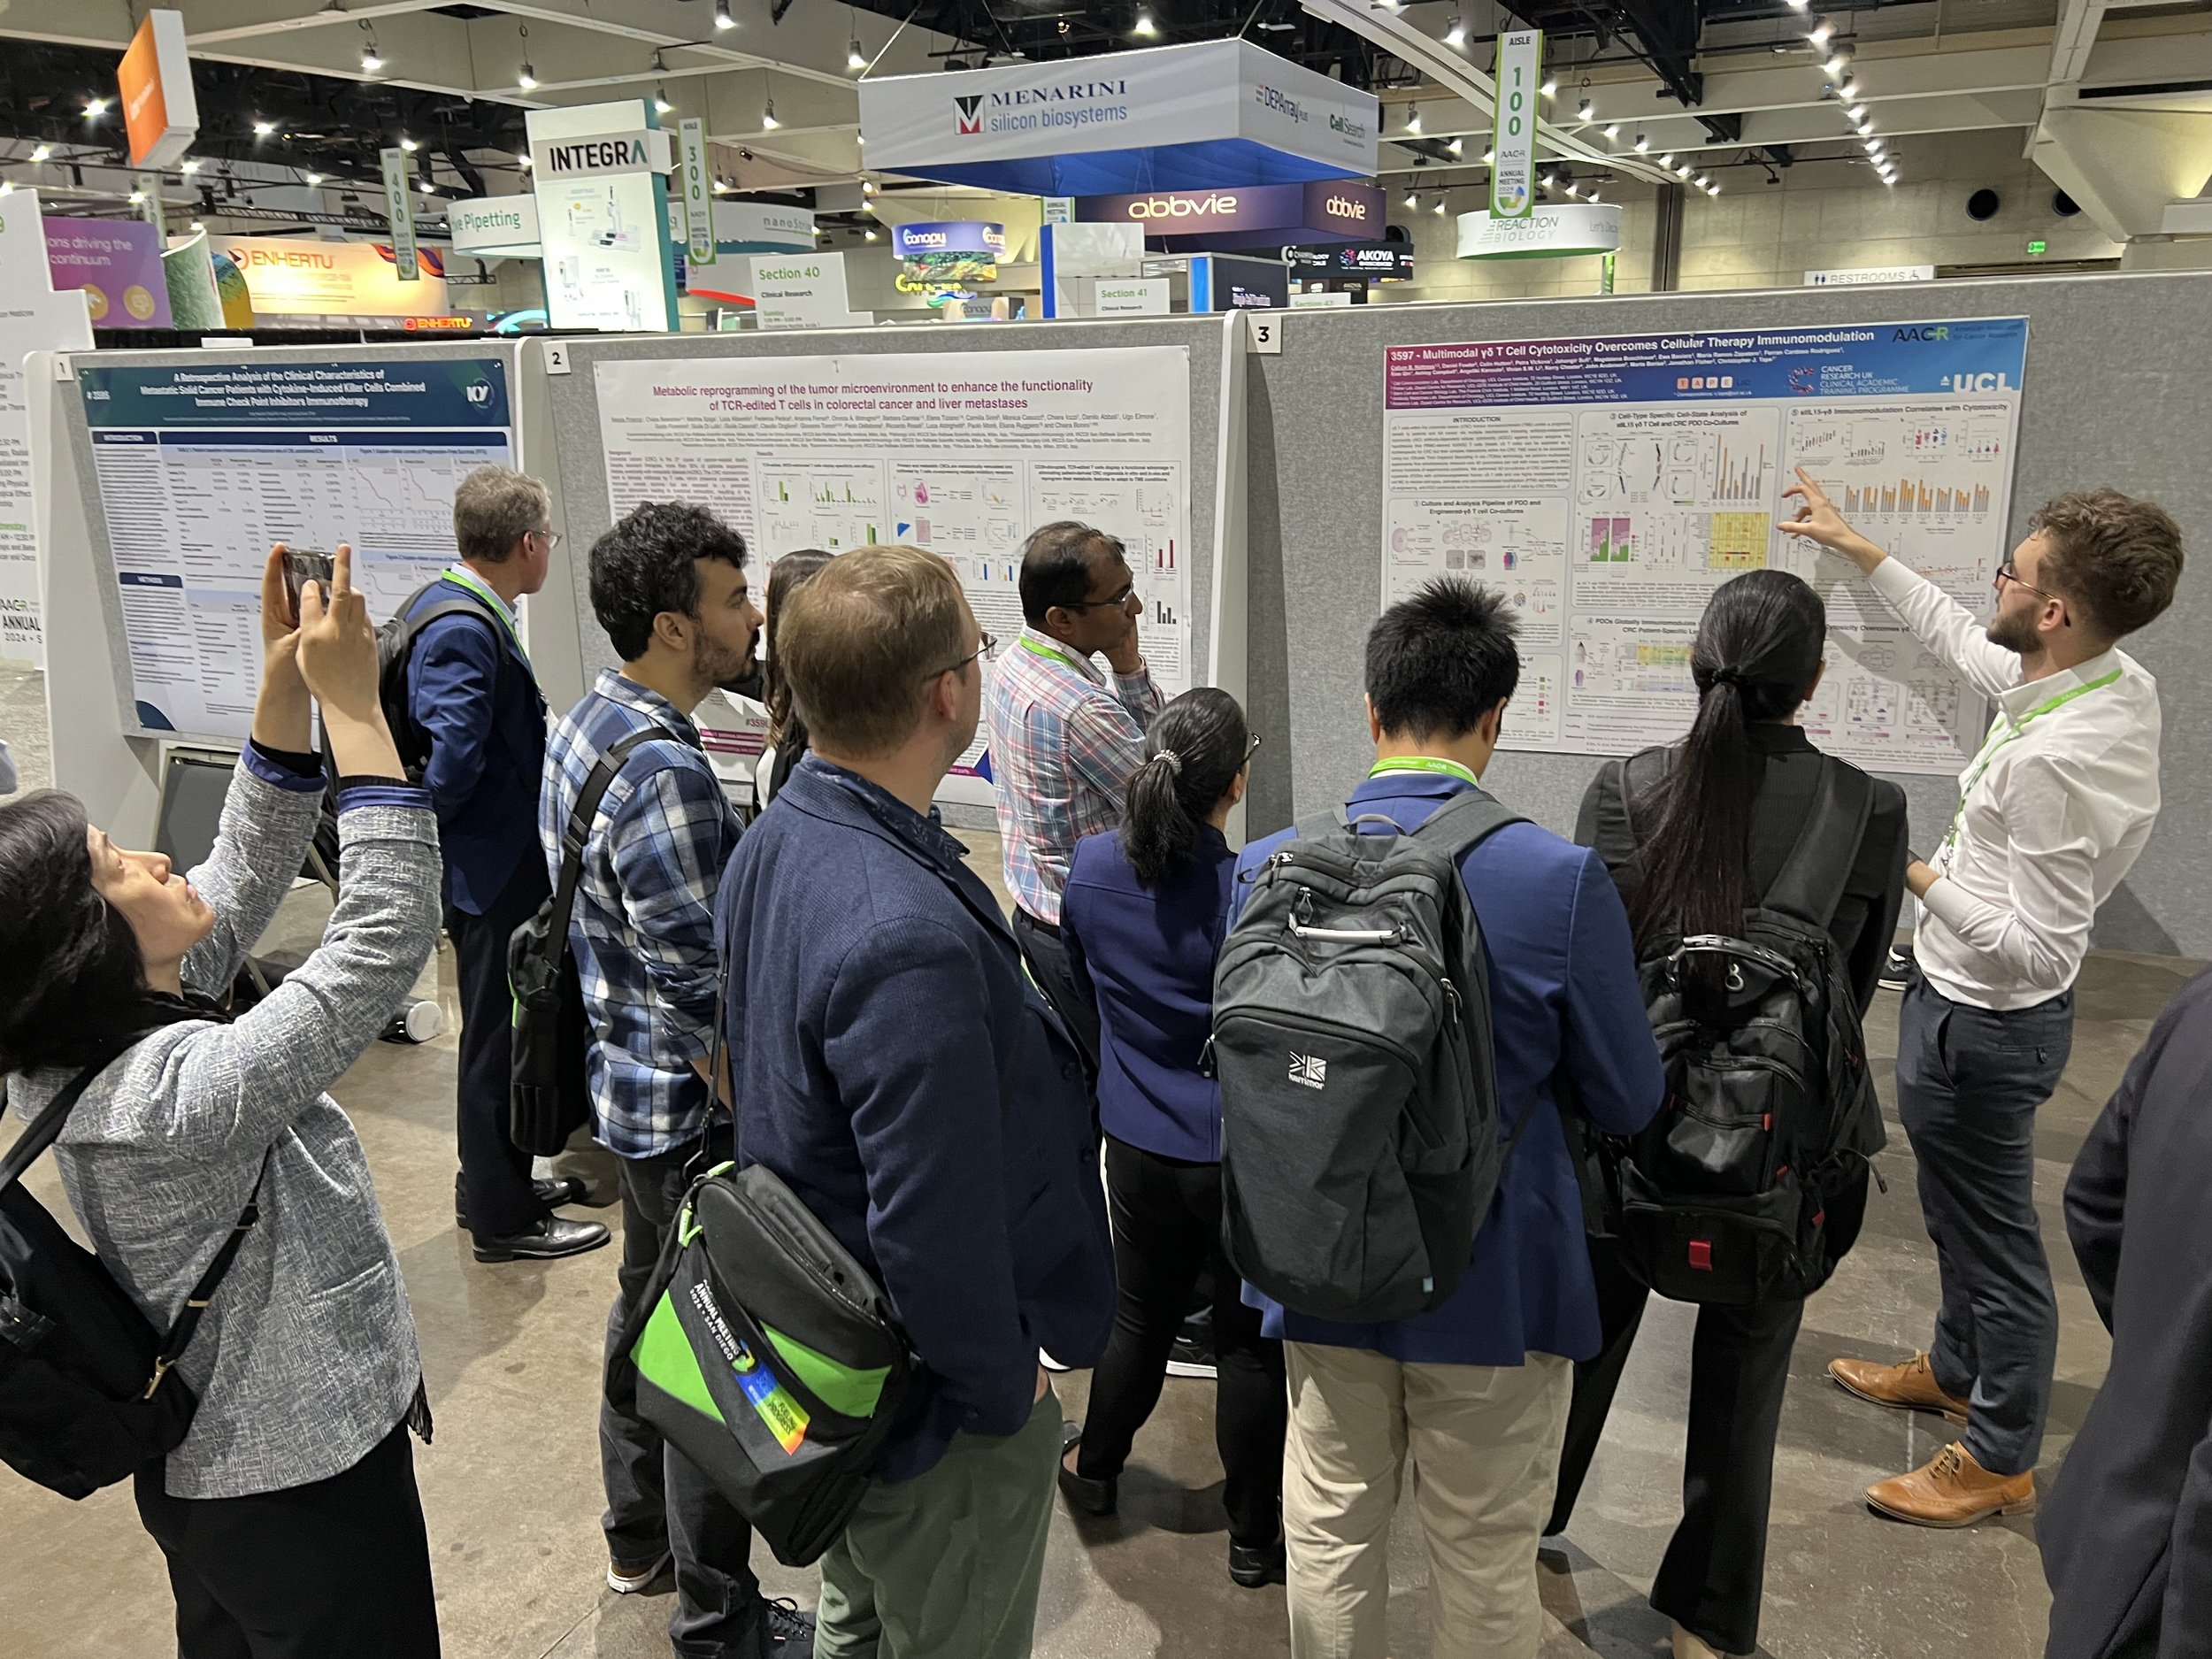  Callum presenting his poster at AACR (Apr. 24) 